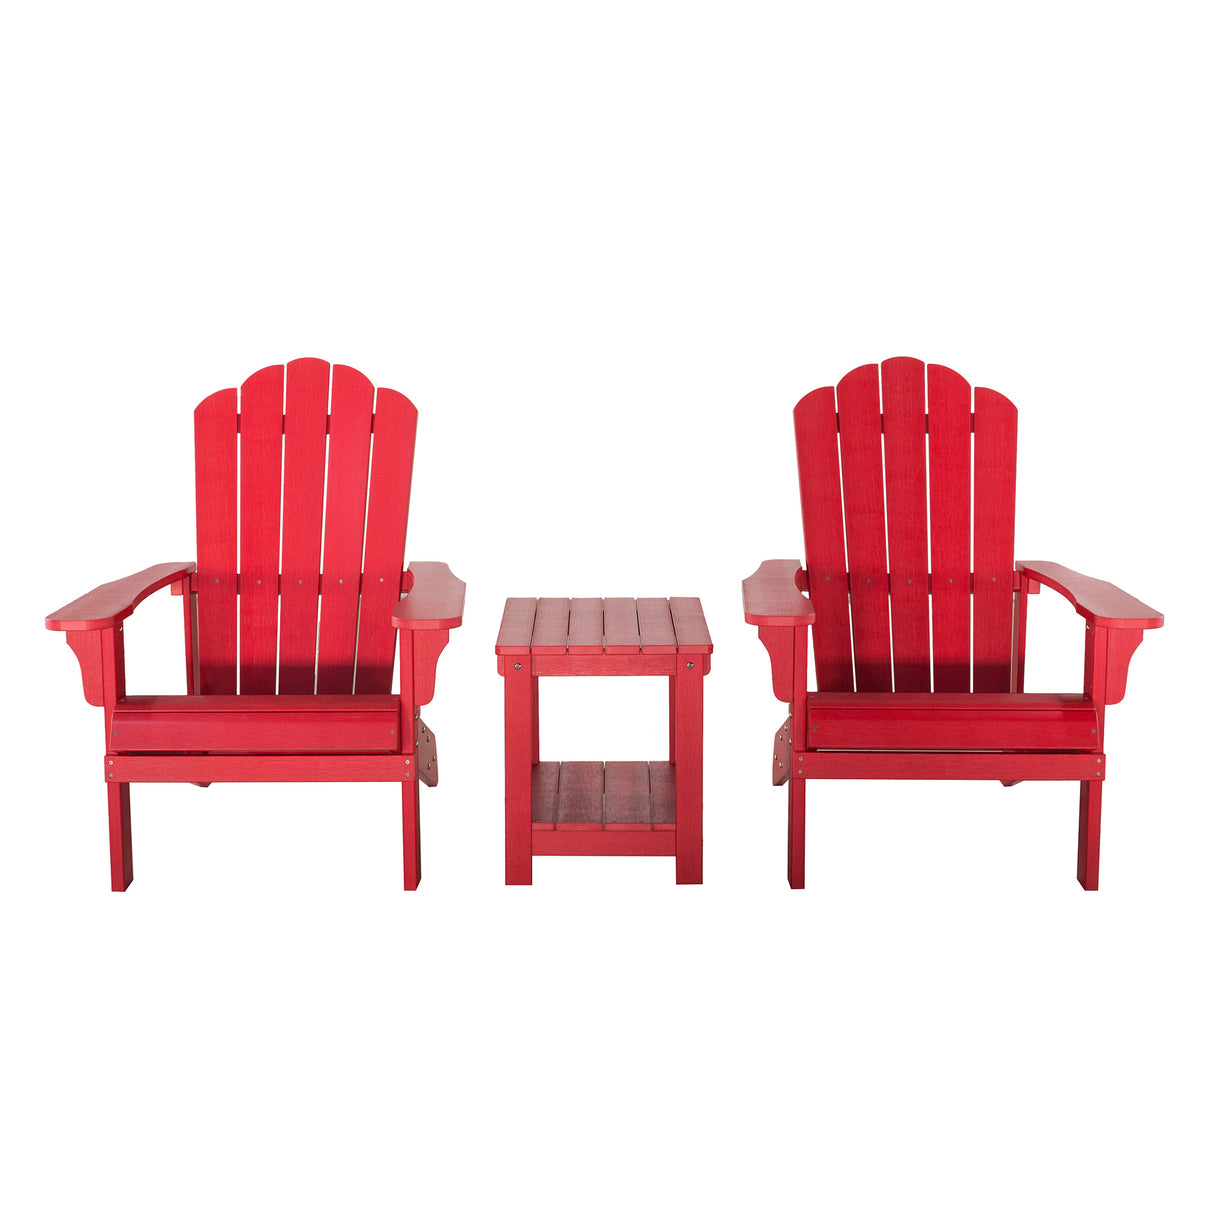 Key West 3 Piece Outdoor Patio All-Weather Plastic Wood Adirondack Bistro Set, 2 Adirondack chairs, and 1 small, side, end table set for Deck, Backyards, Garden, Lawns, Poolside, and Beaches, Red